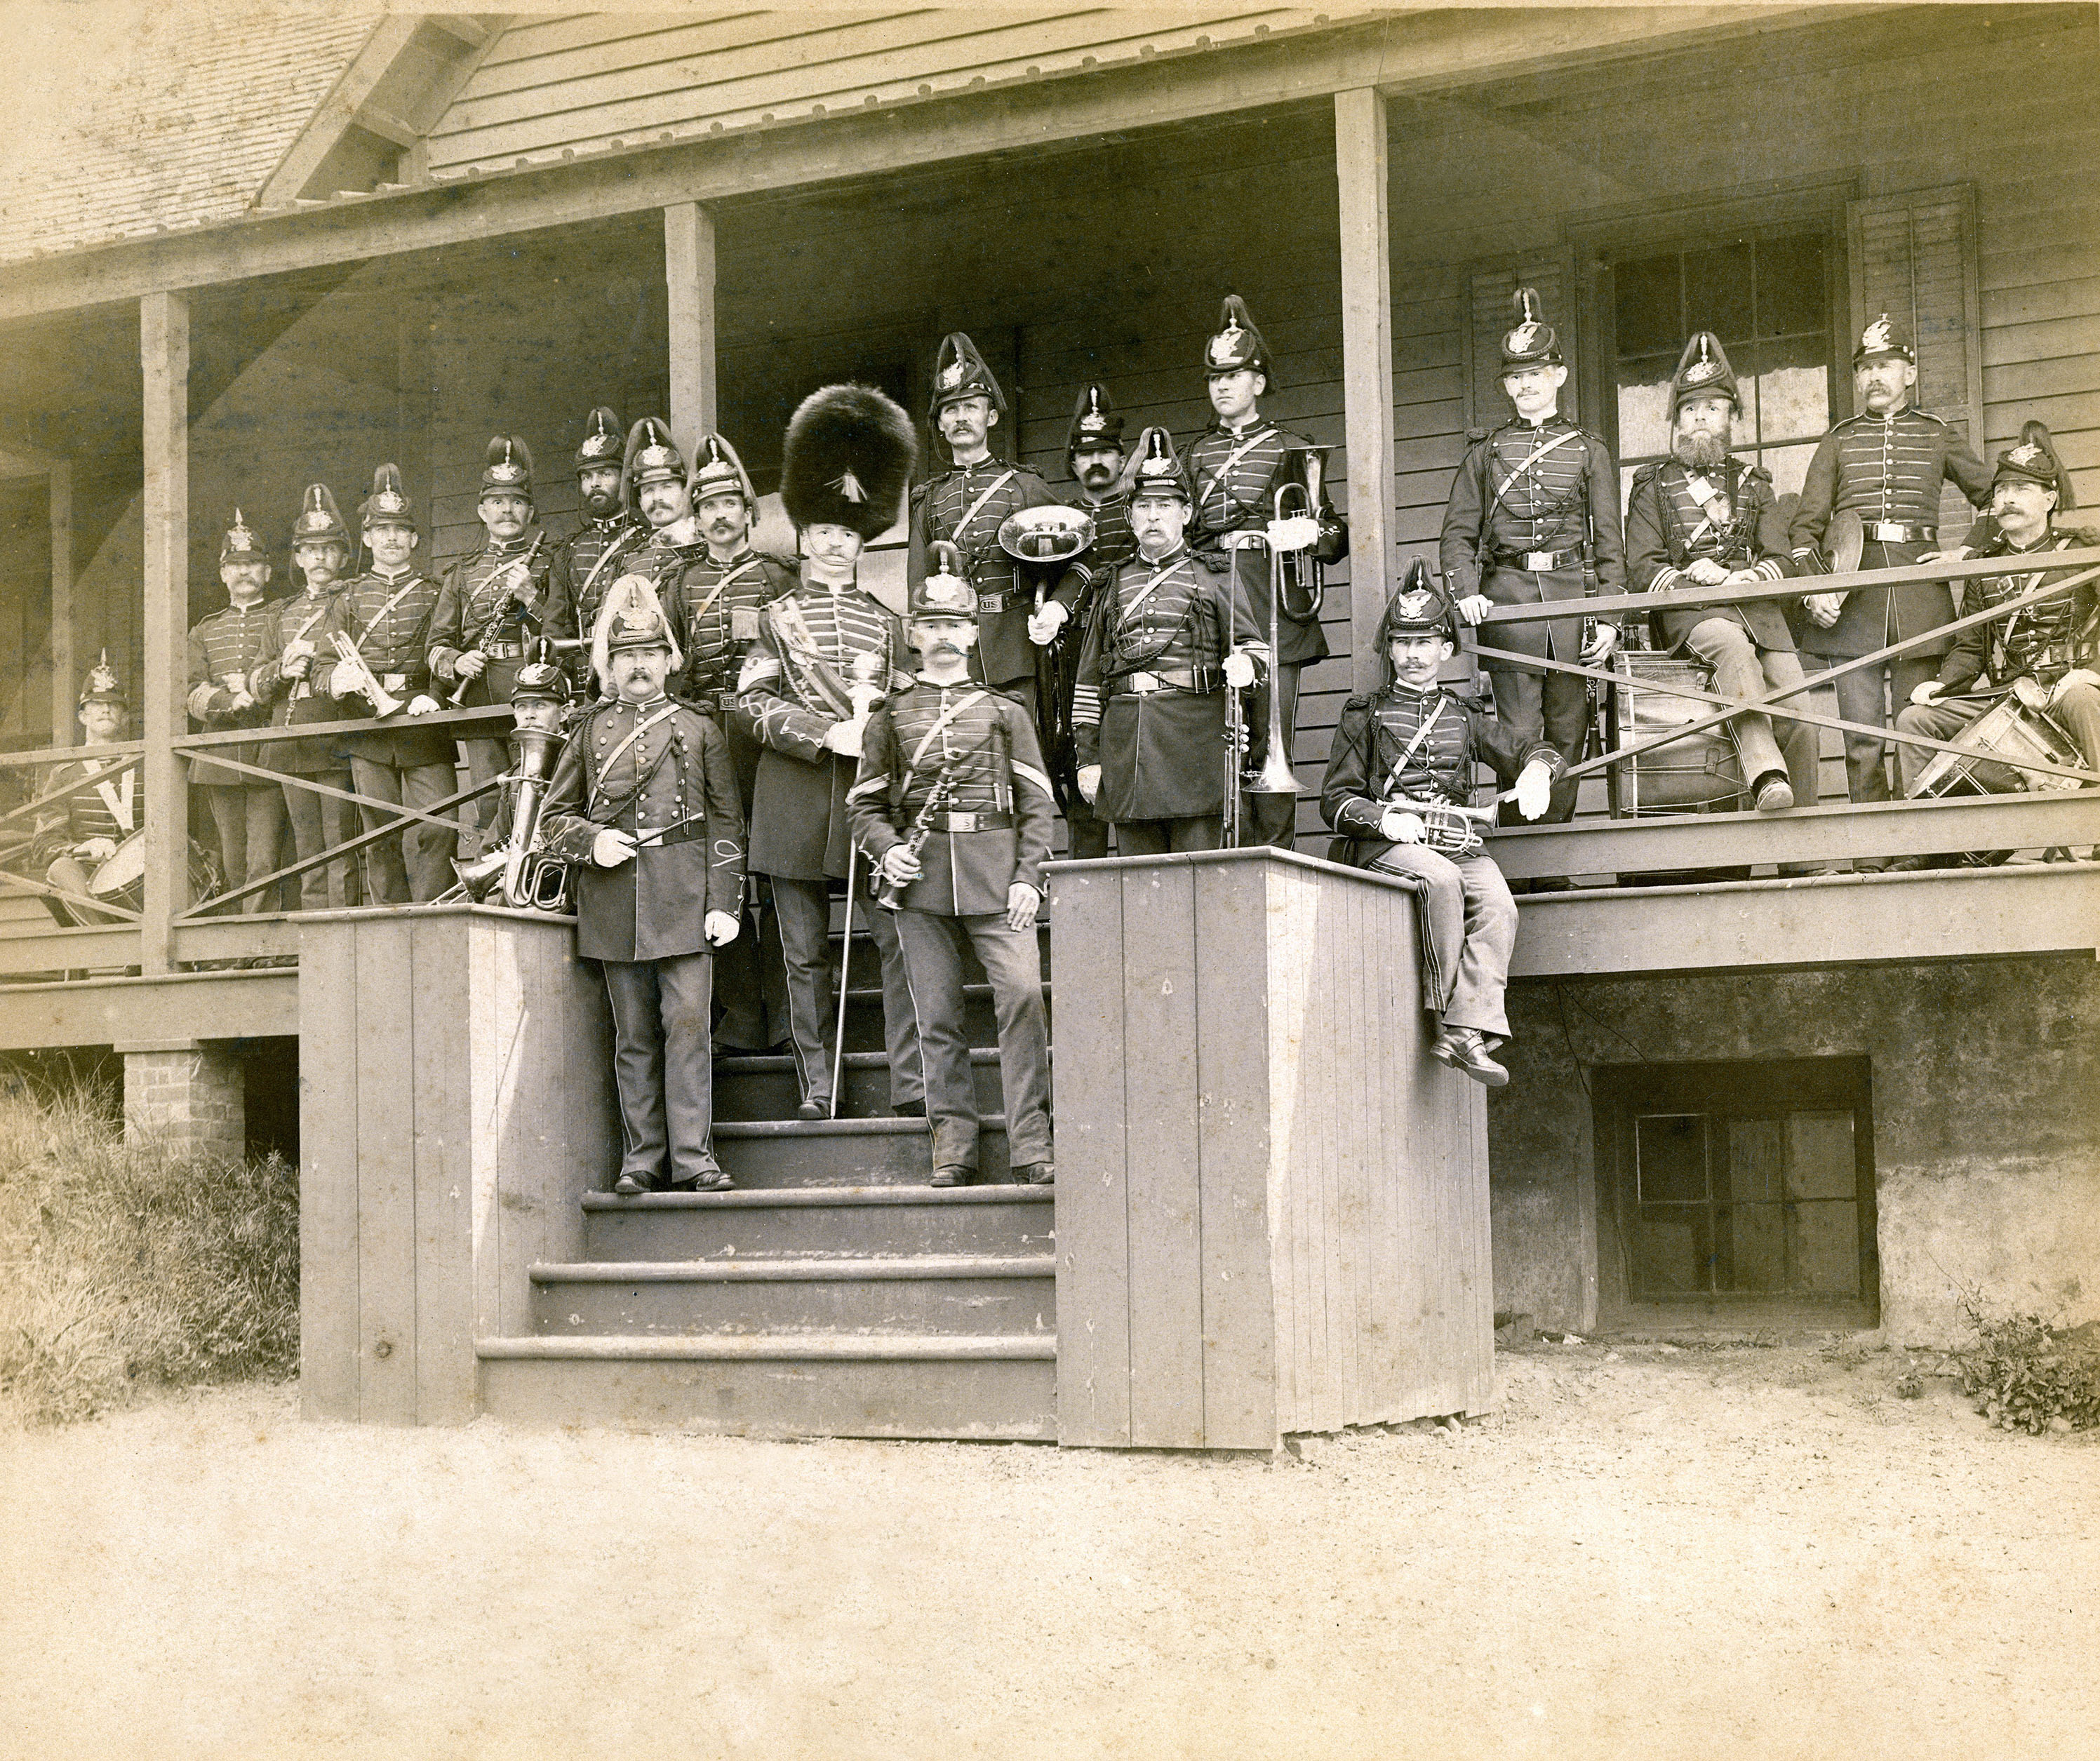 Band on steps of photo lab building